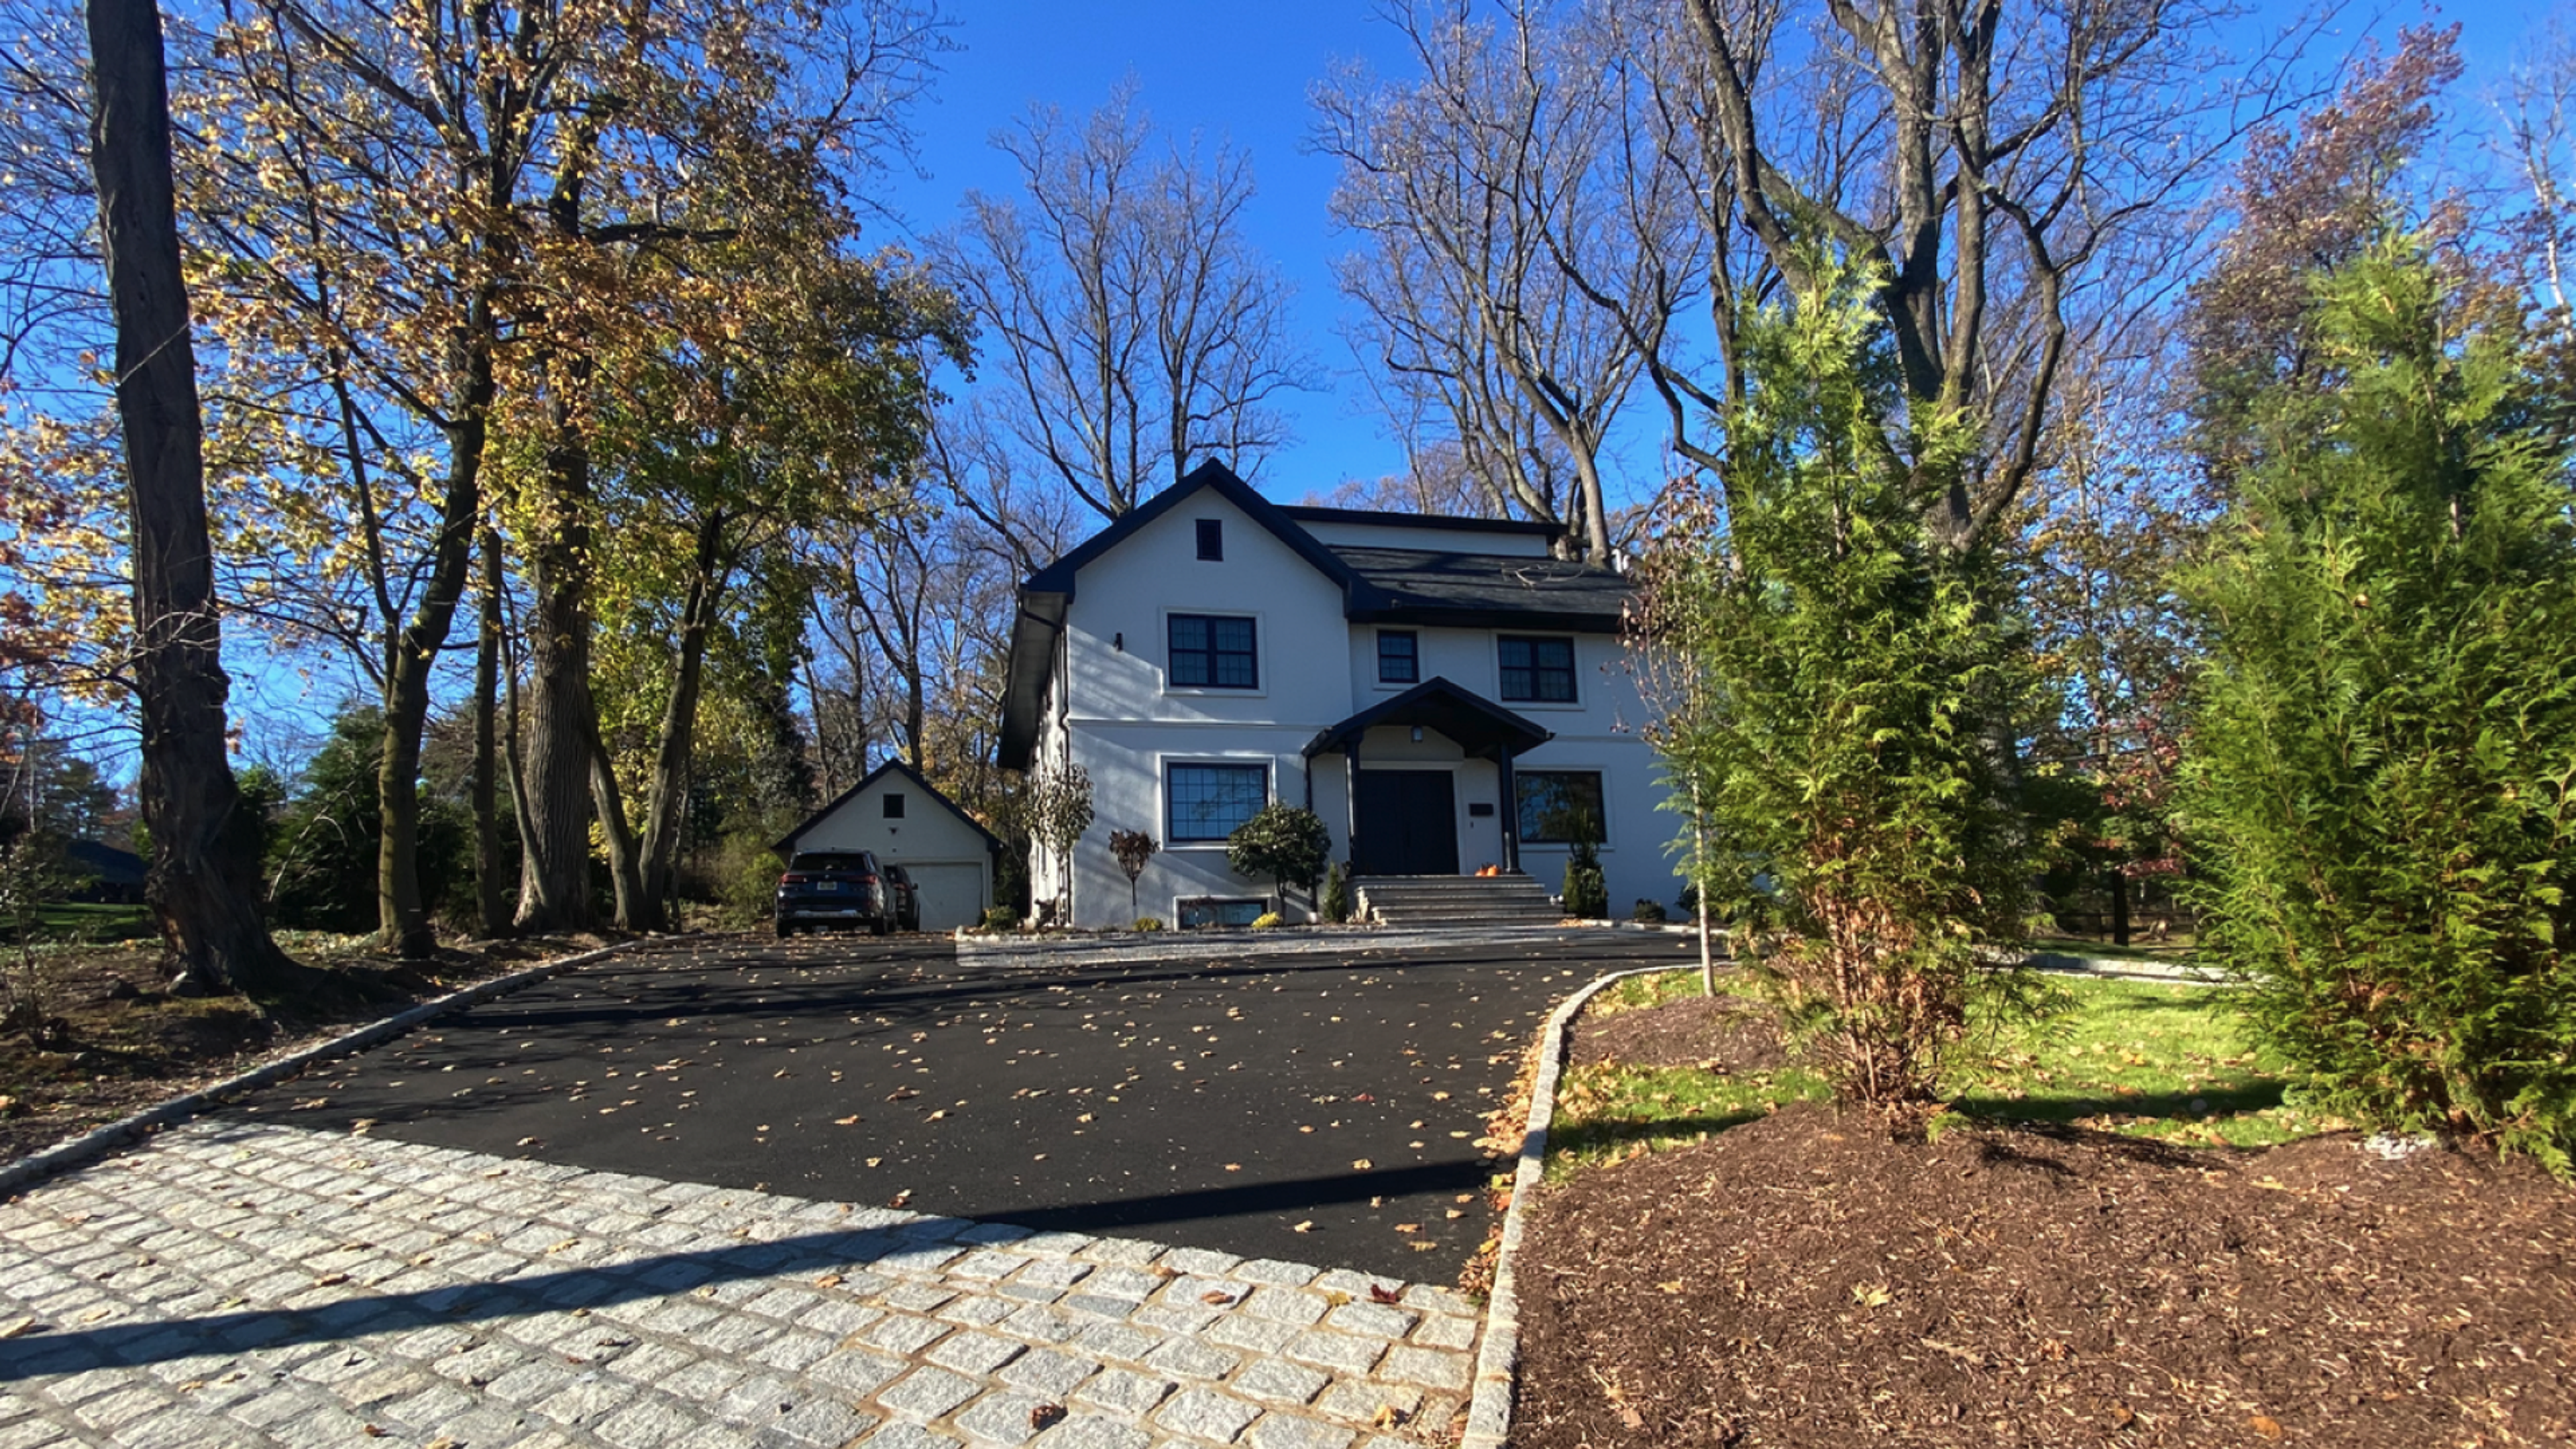 Mid-Atlantic completed a substantial rehabilitation of this home in South Orange, NJ